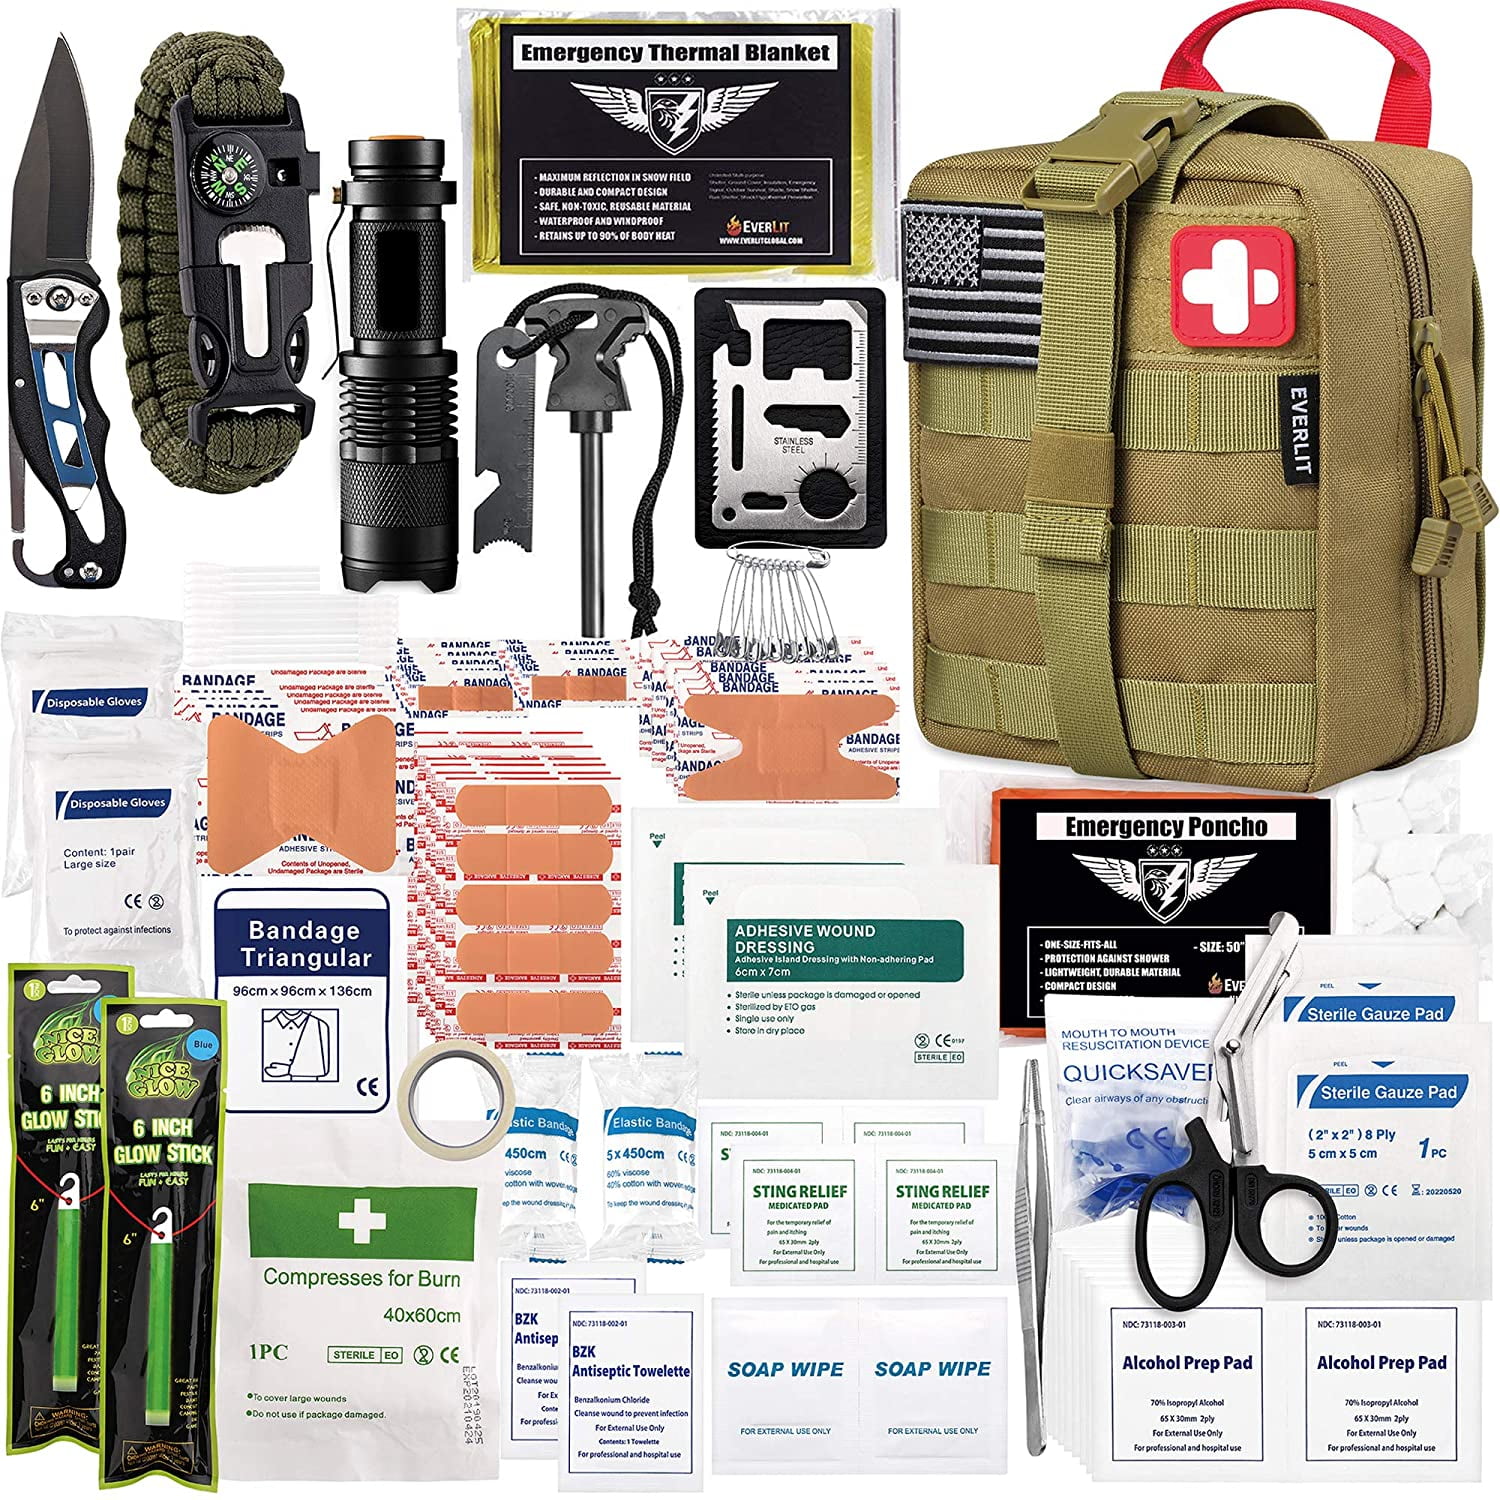 ASATechMed Emergency Survival Trauma Medical Kit w/ Molle Pouch First Aid Kit